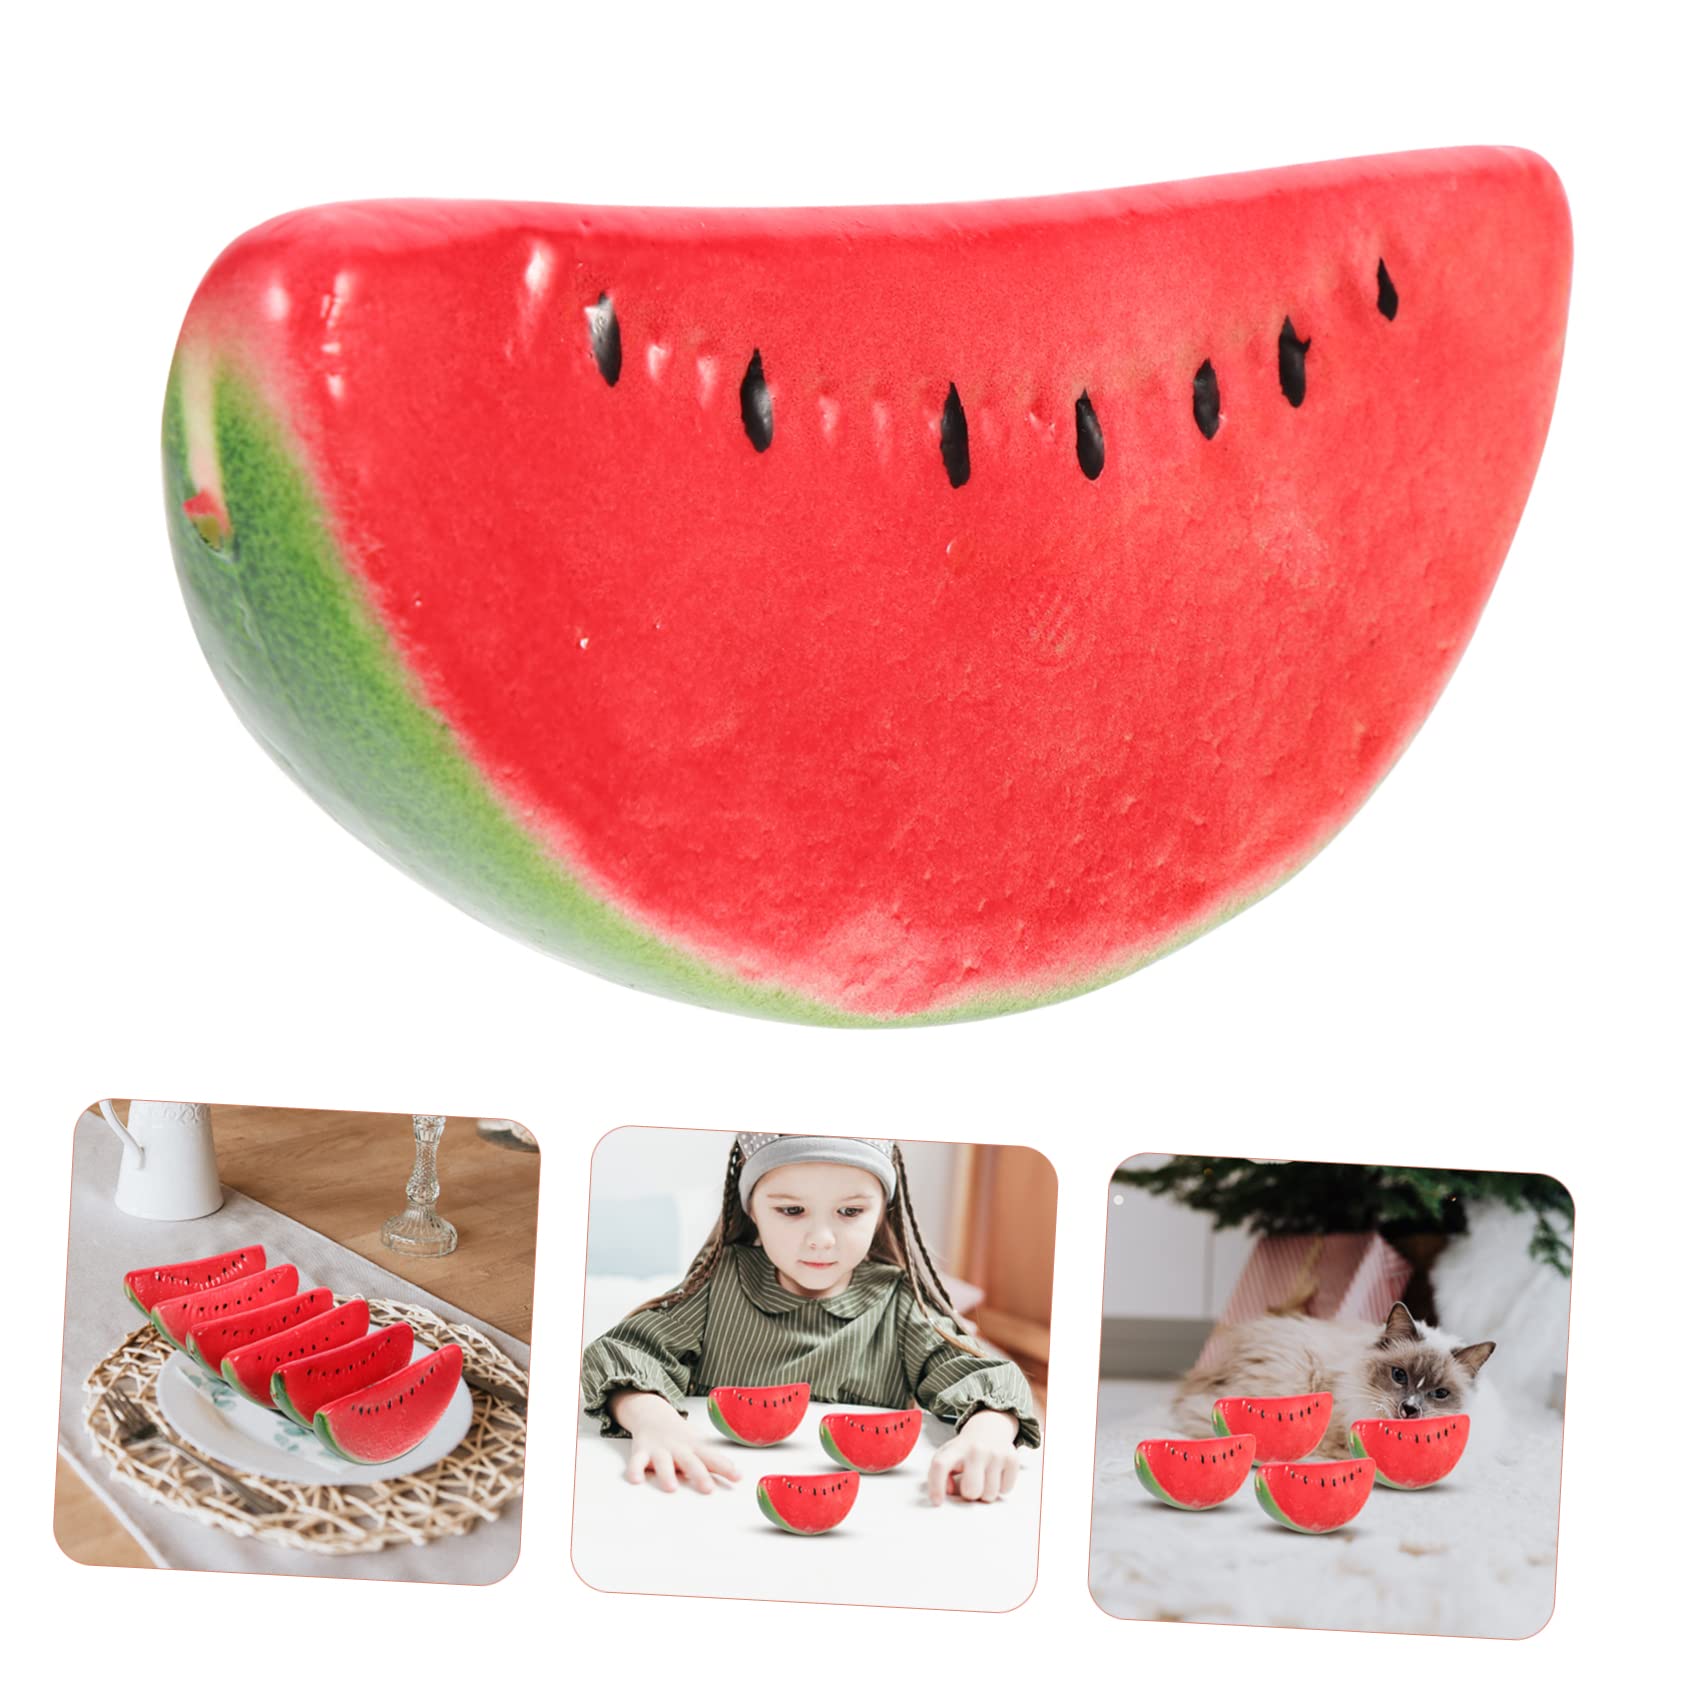 ORFOFE 24 Pcs Simulated Watermelon Photo Prop Fake Watermelon Slices Watermelon Toy Fake Watermelon Prop Faux Vegetables Children Toys Artificial Food Foam Red Fruit Slices